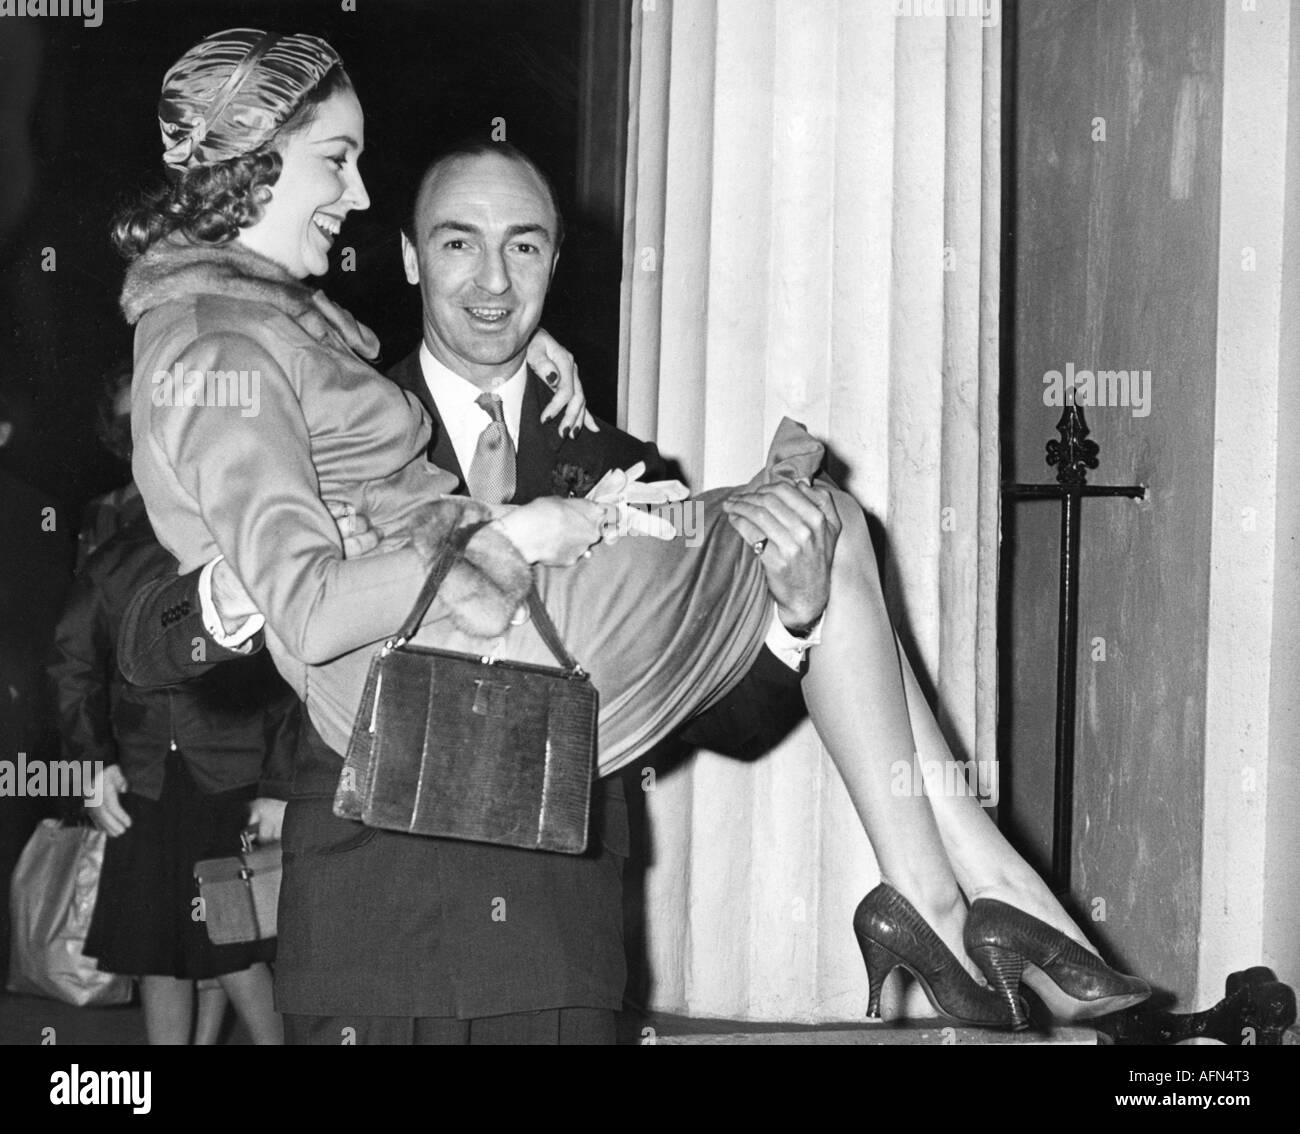 Profumo, John Dennis, 30.1.1915 - 10.3.2006, British politician, (conservative), (Tories), half length, with wife Valerie Hobson, after wedding, carrying bride over threshold, Regent's Park, London, 31.12.1954, Stock Photo